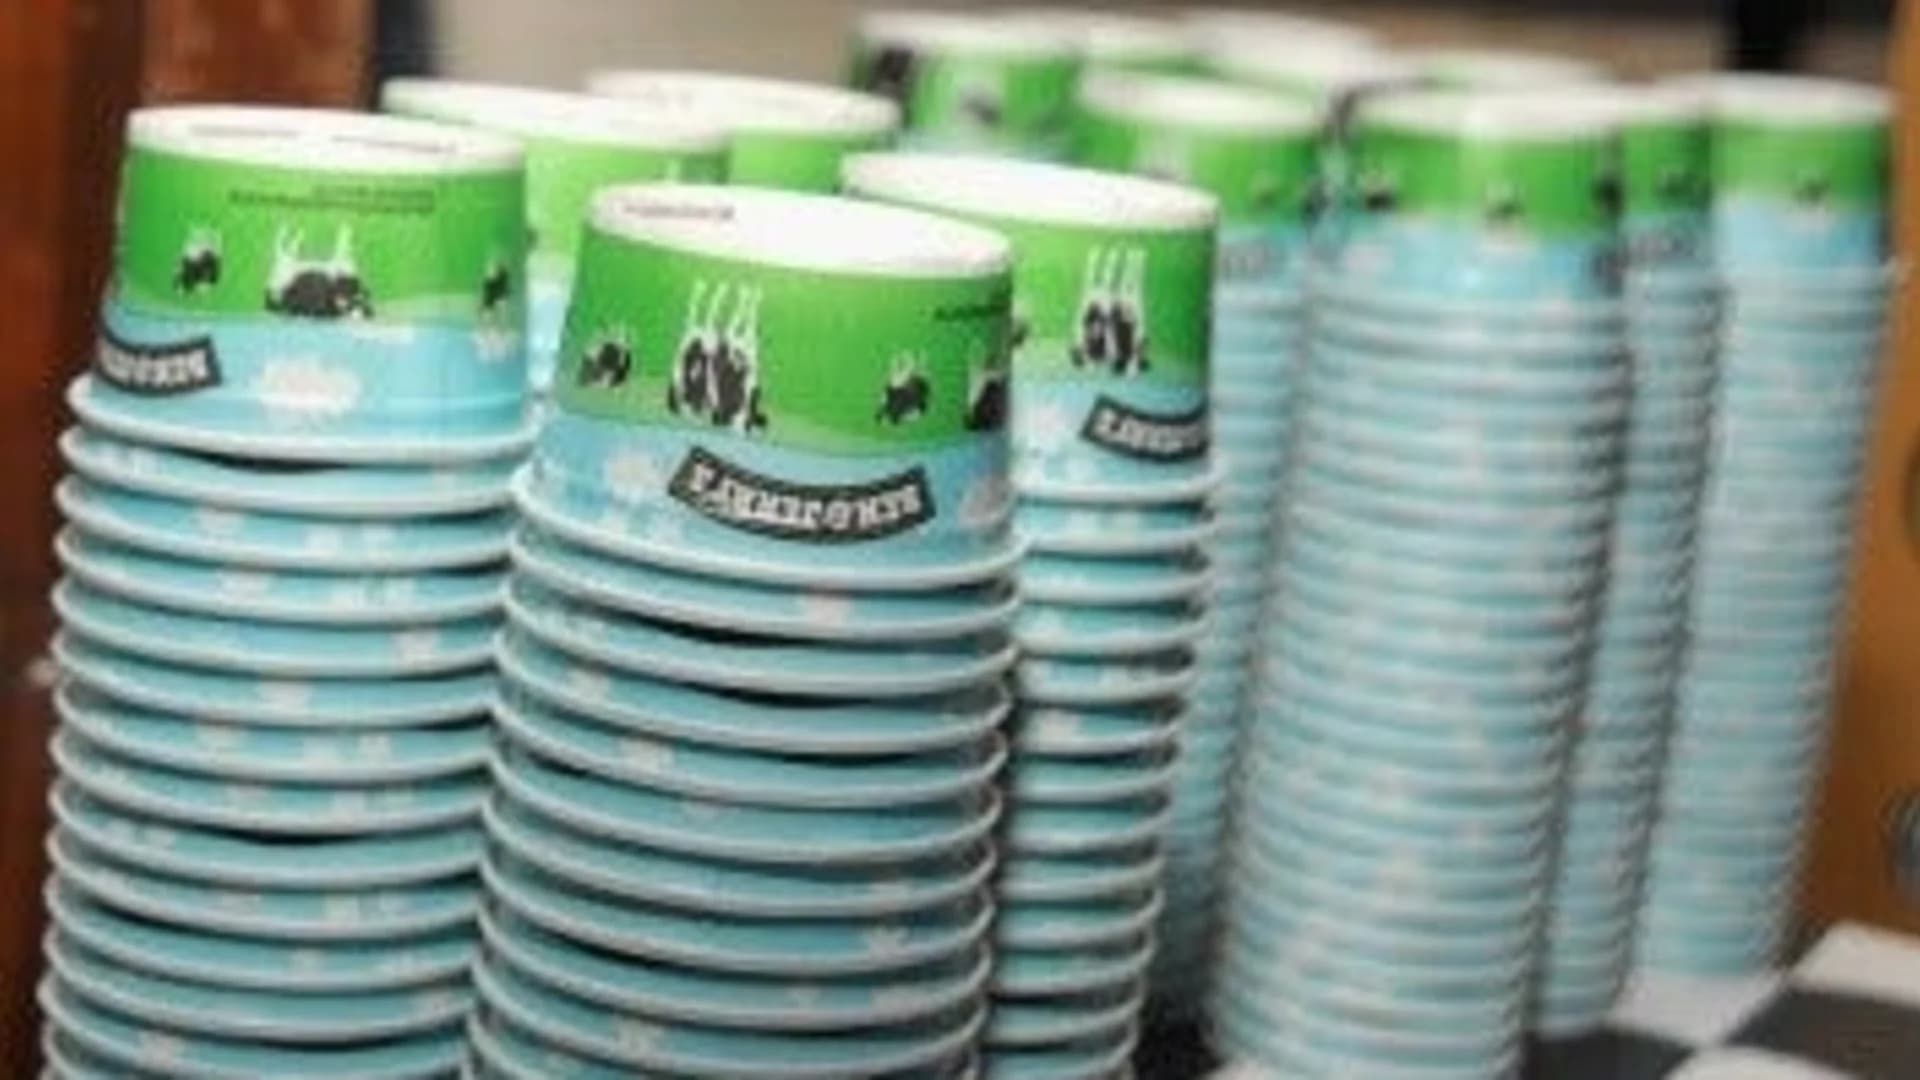 Ben & Jerry's creating "take back Congress" flavors